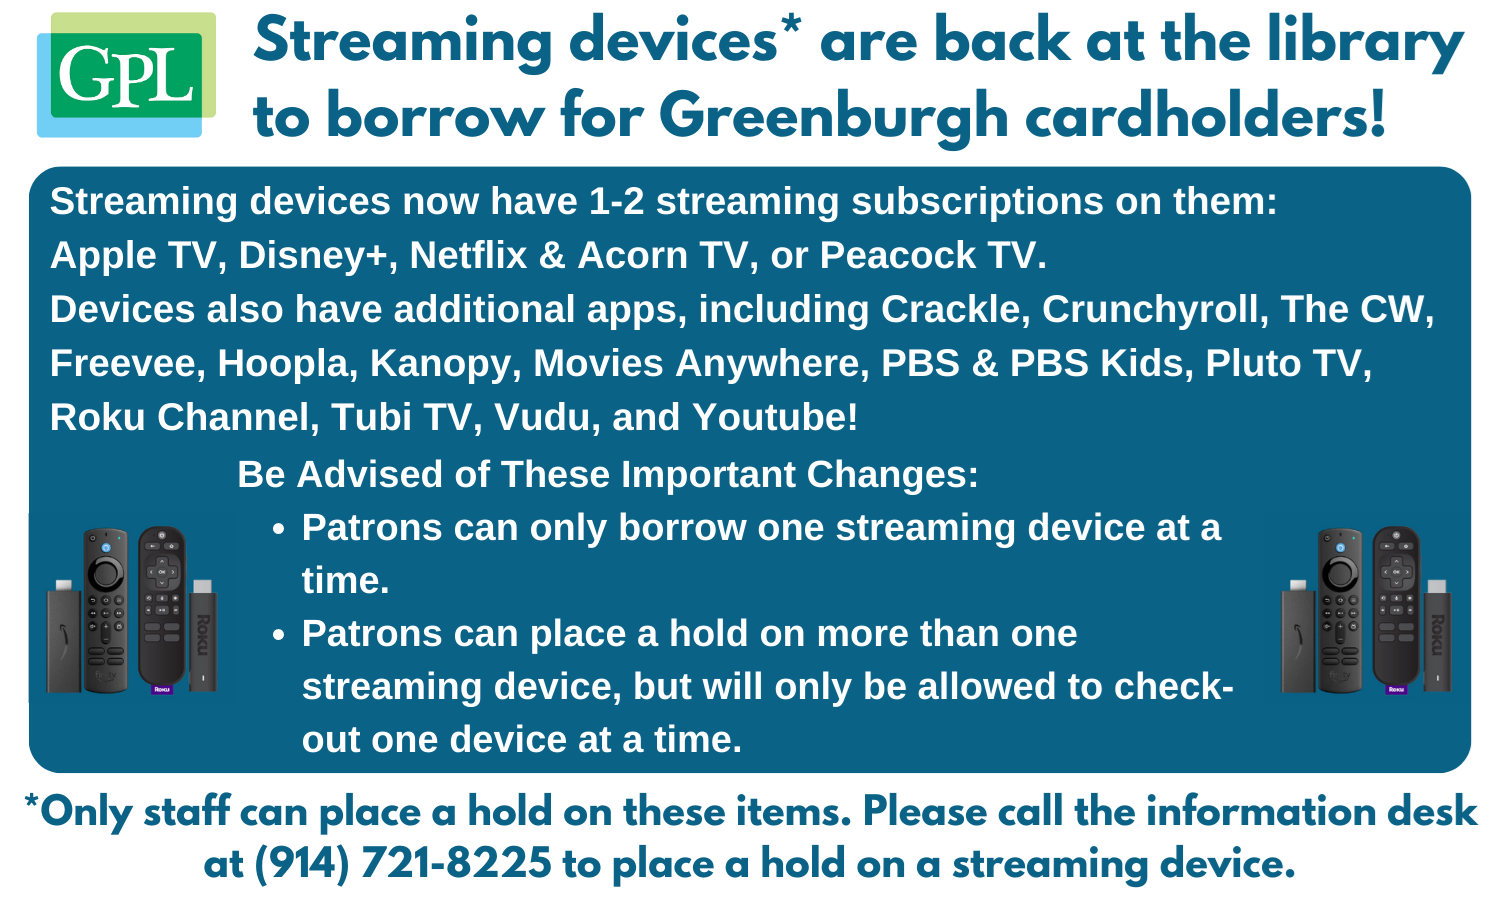 Streaming devices are back at the library to borrow for Greenburgh cardholders!